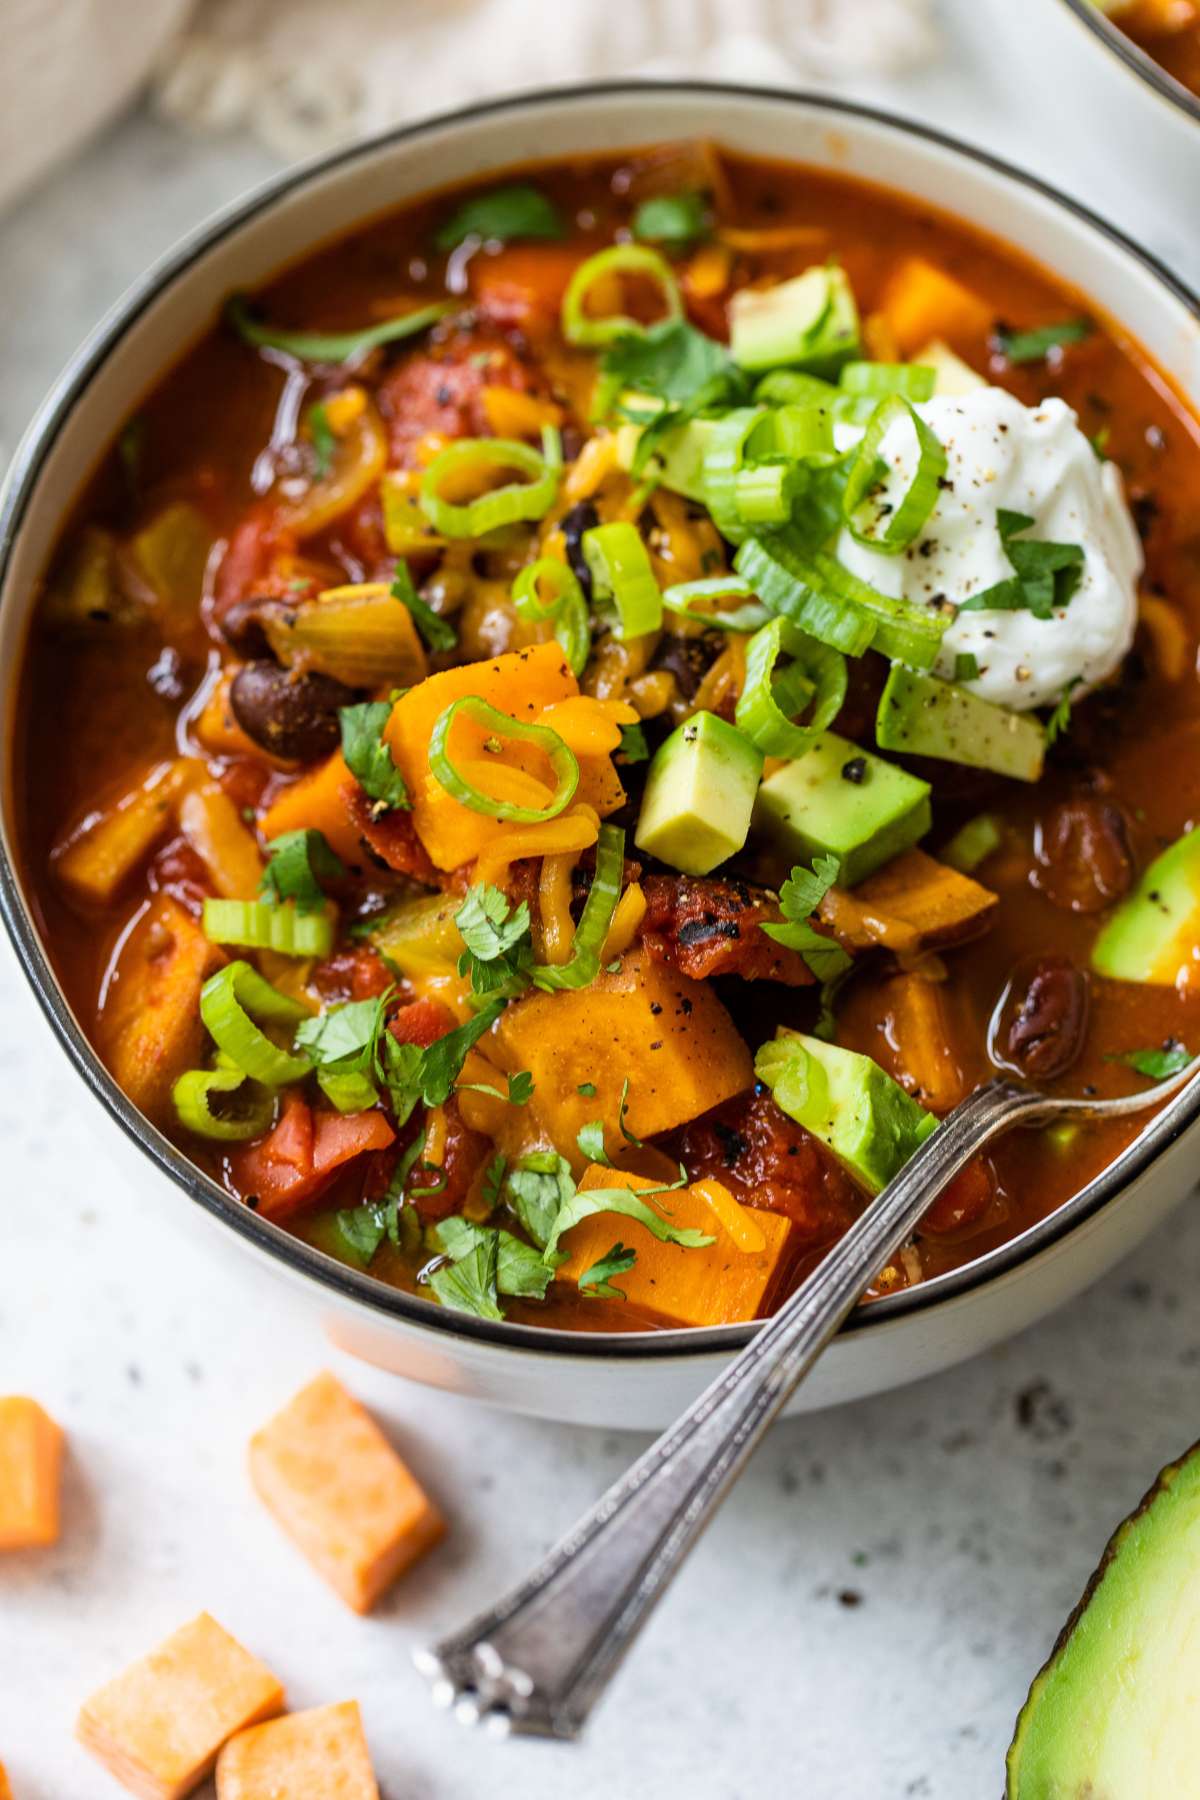 Black bean sweet potato chili in a bowl with a spoon.